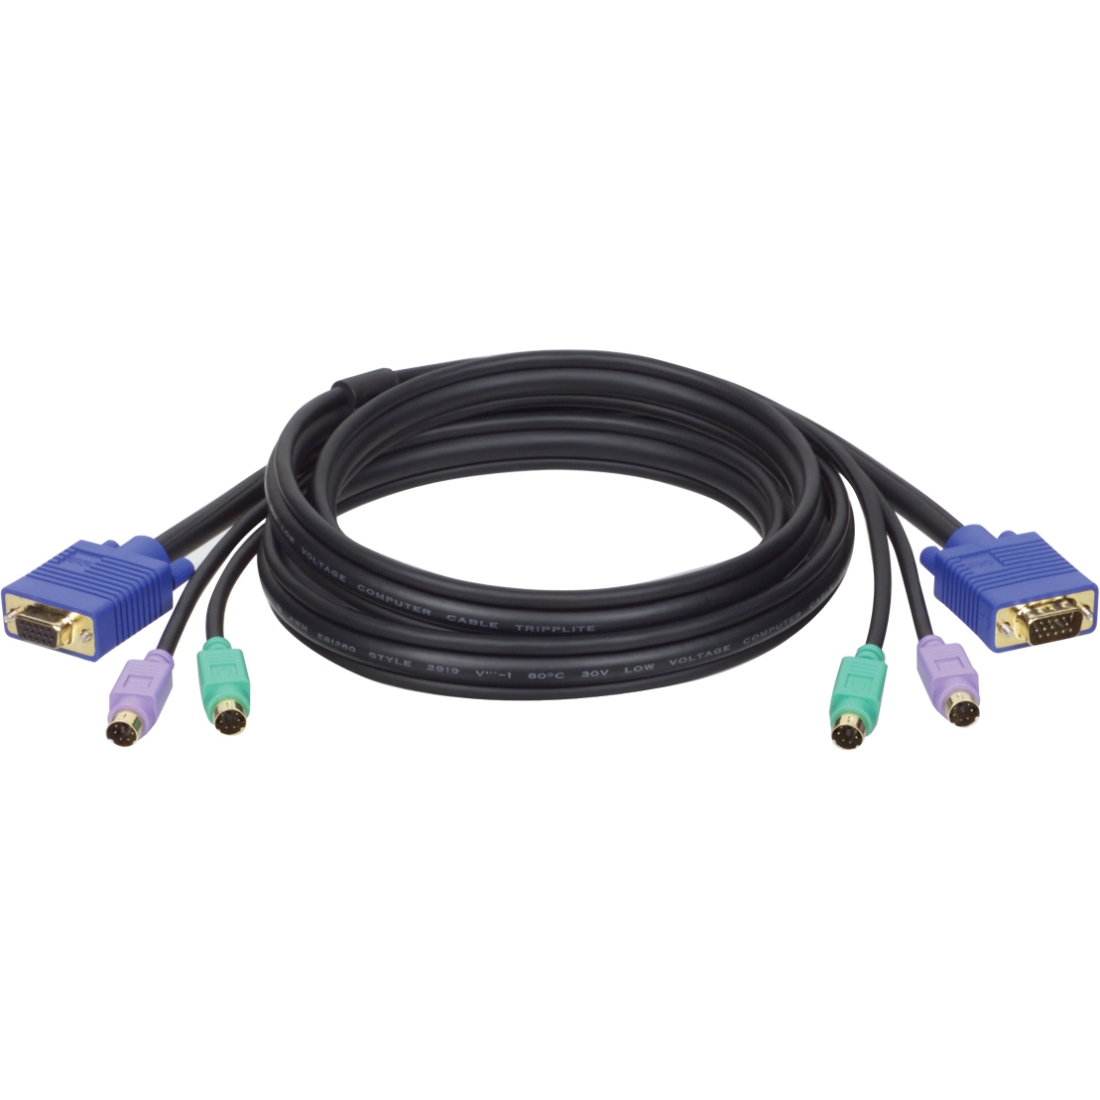 Tripp Lite 15ft PS/2 Cable Kit for B007-008 KVM Switch 3-in-1 Kit - 15ft - Black - image 2 of 2